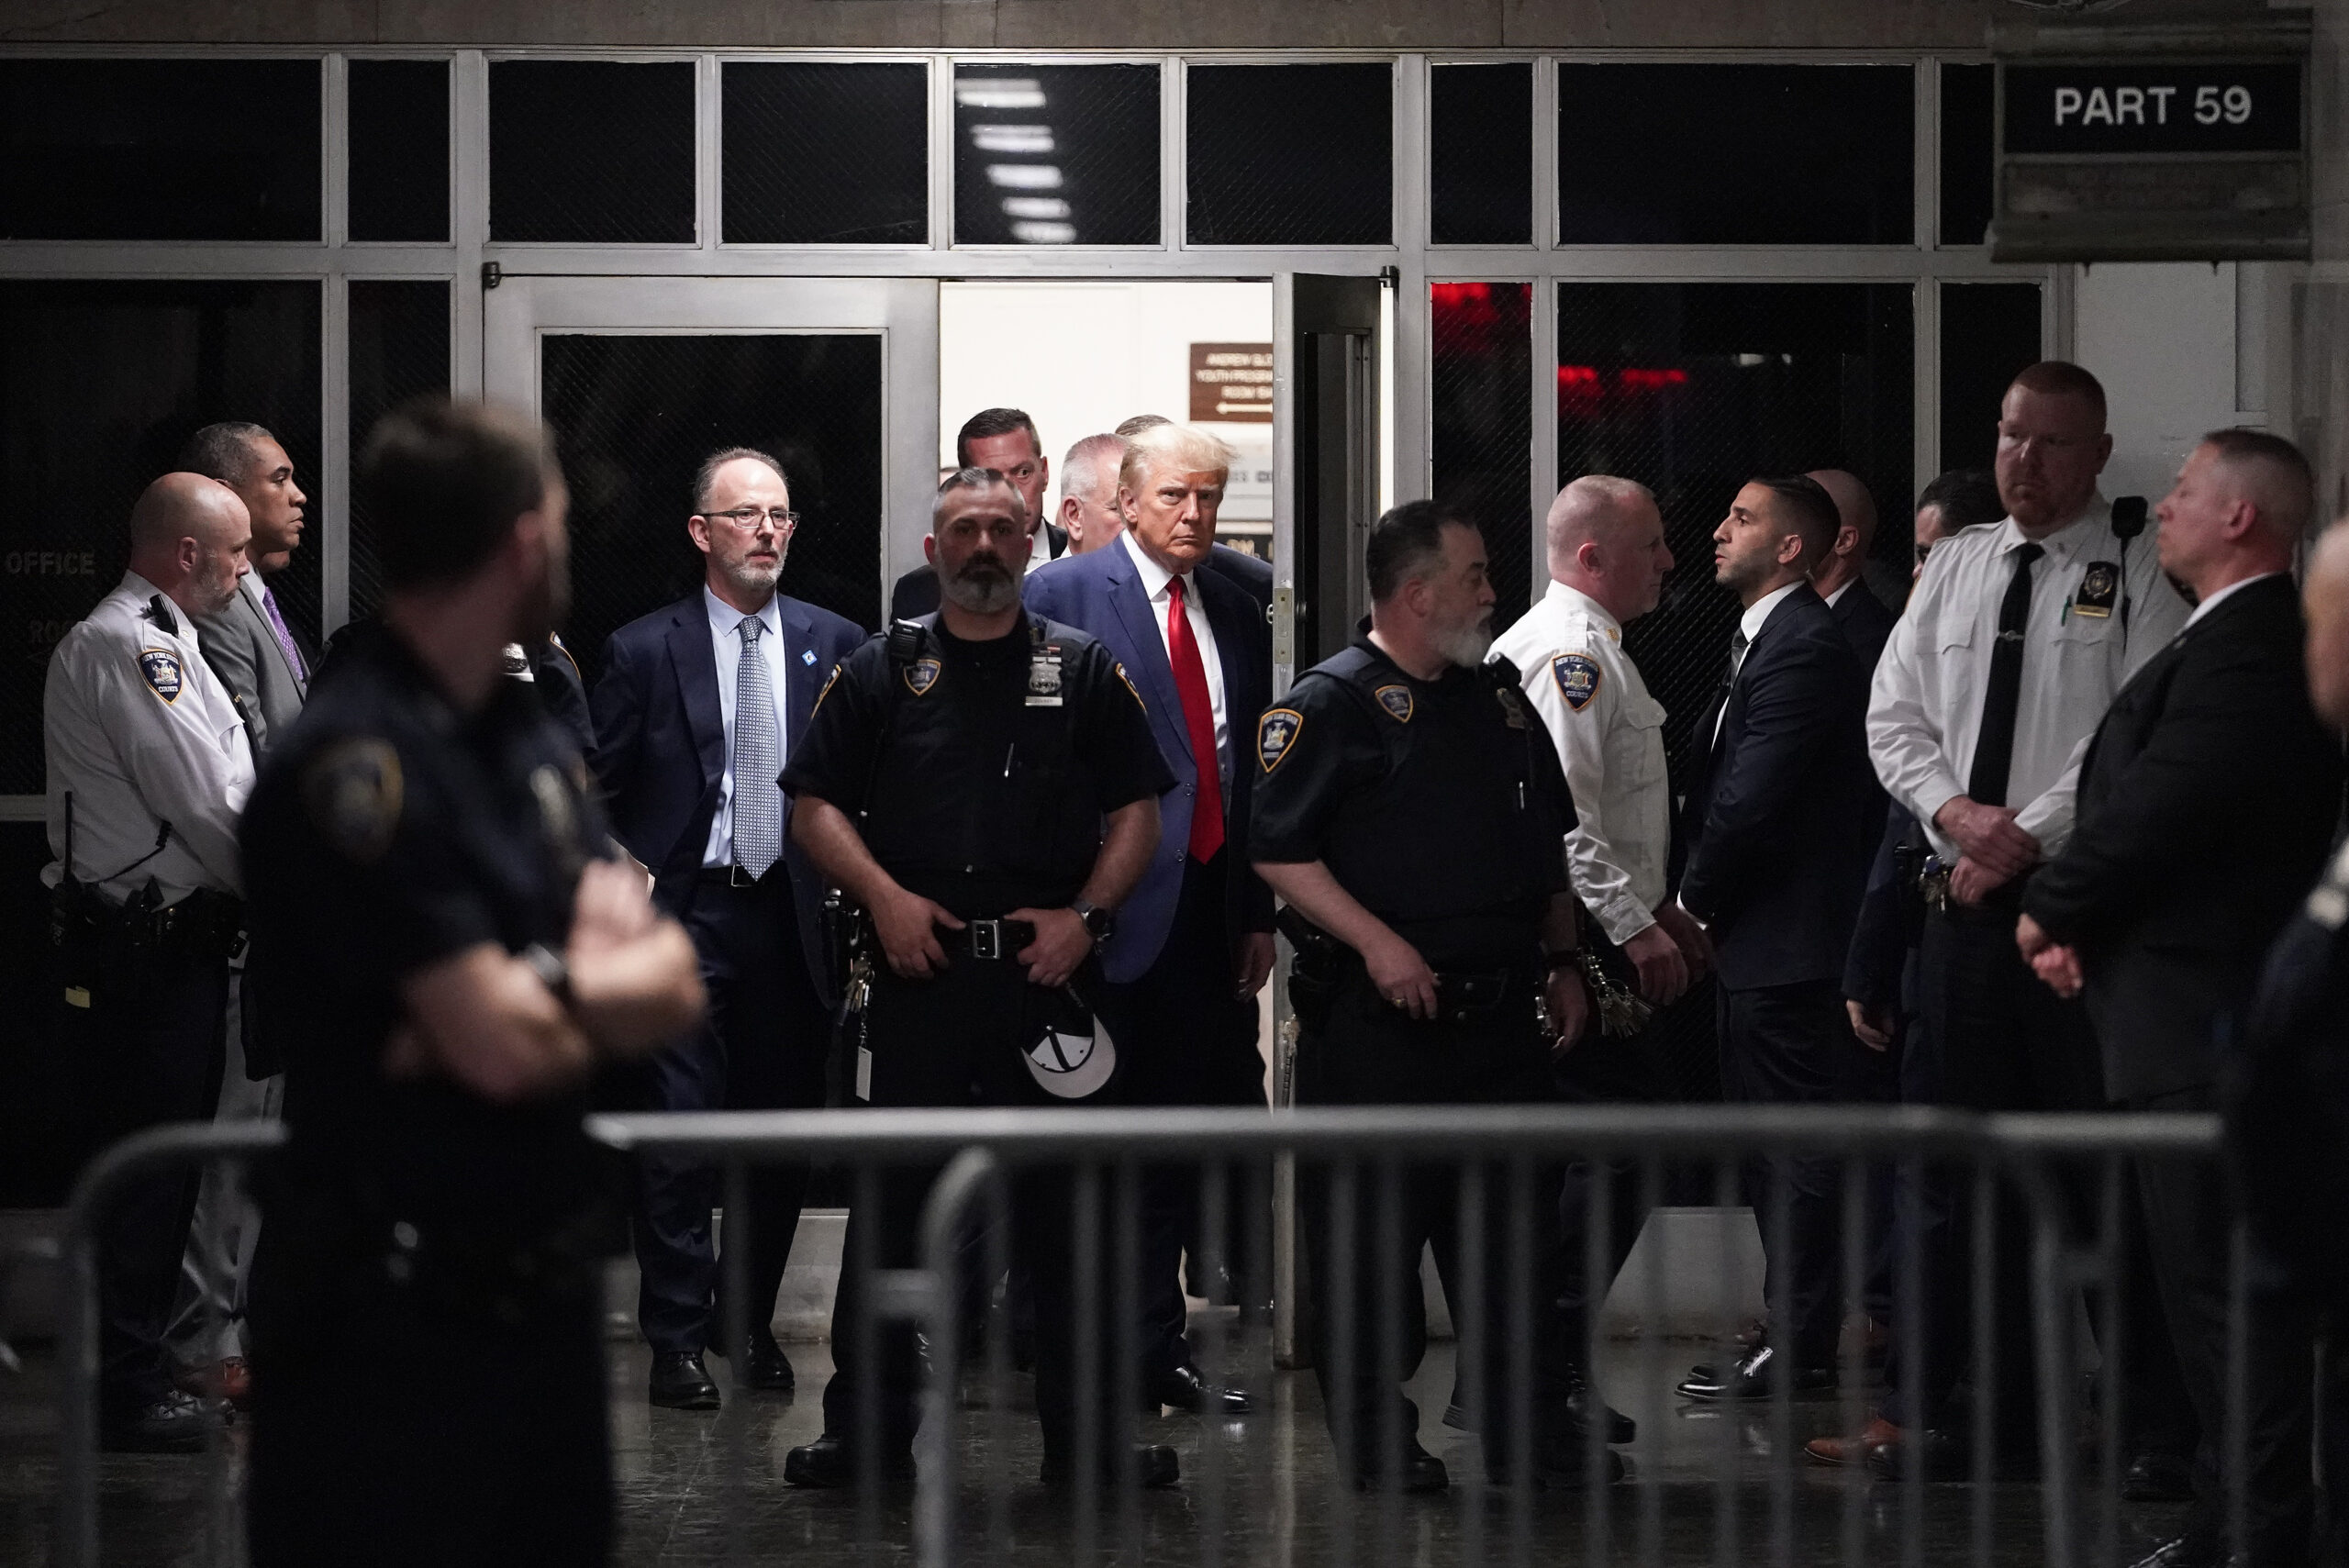 Chatting the Pictures:  Trump on Trial